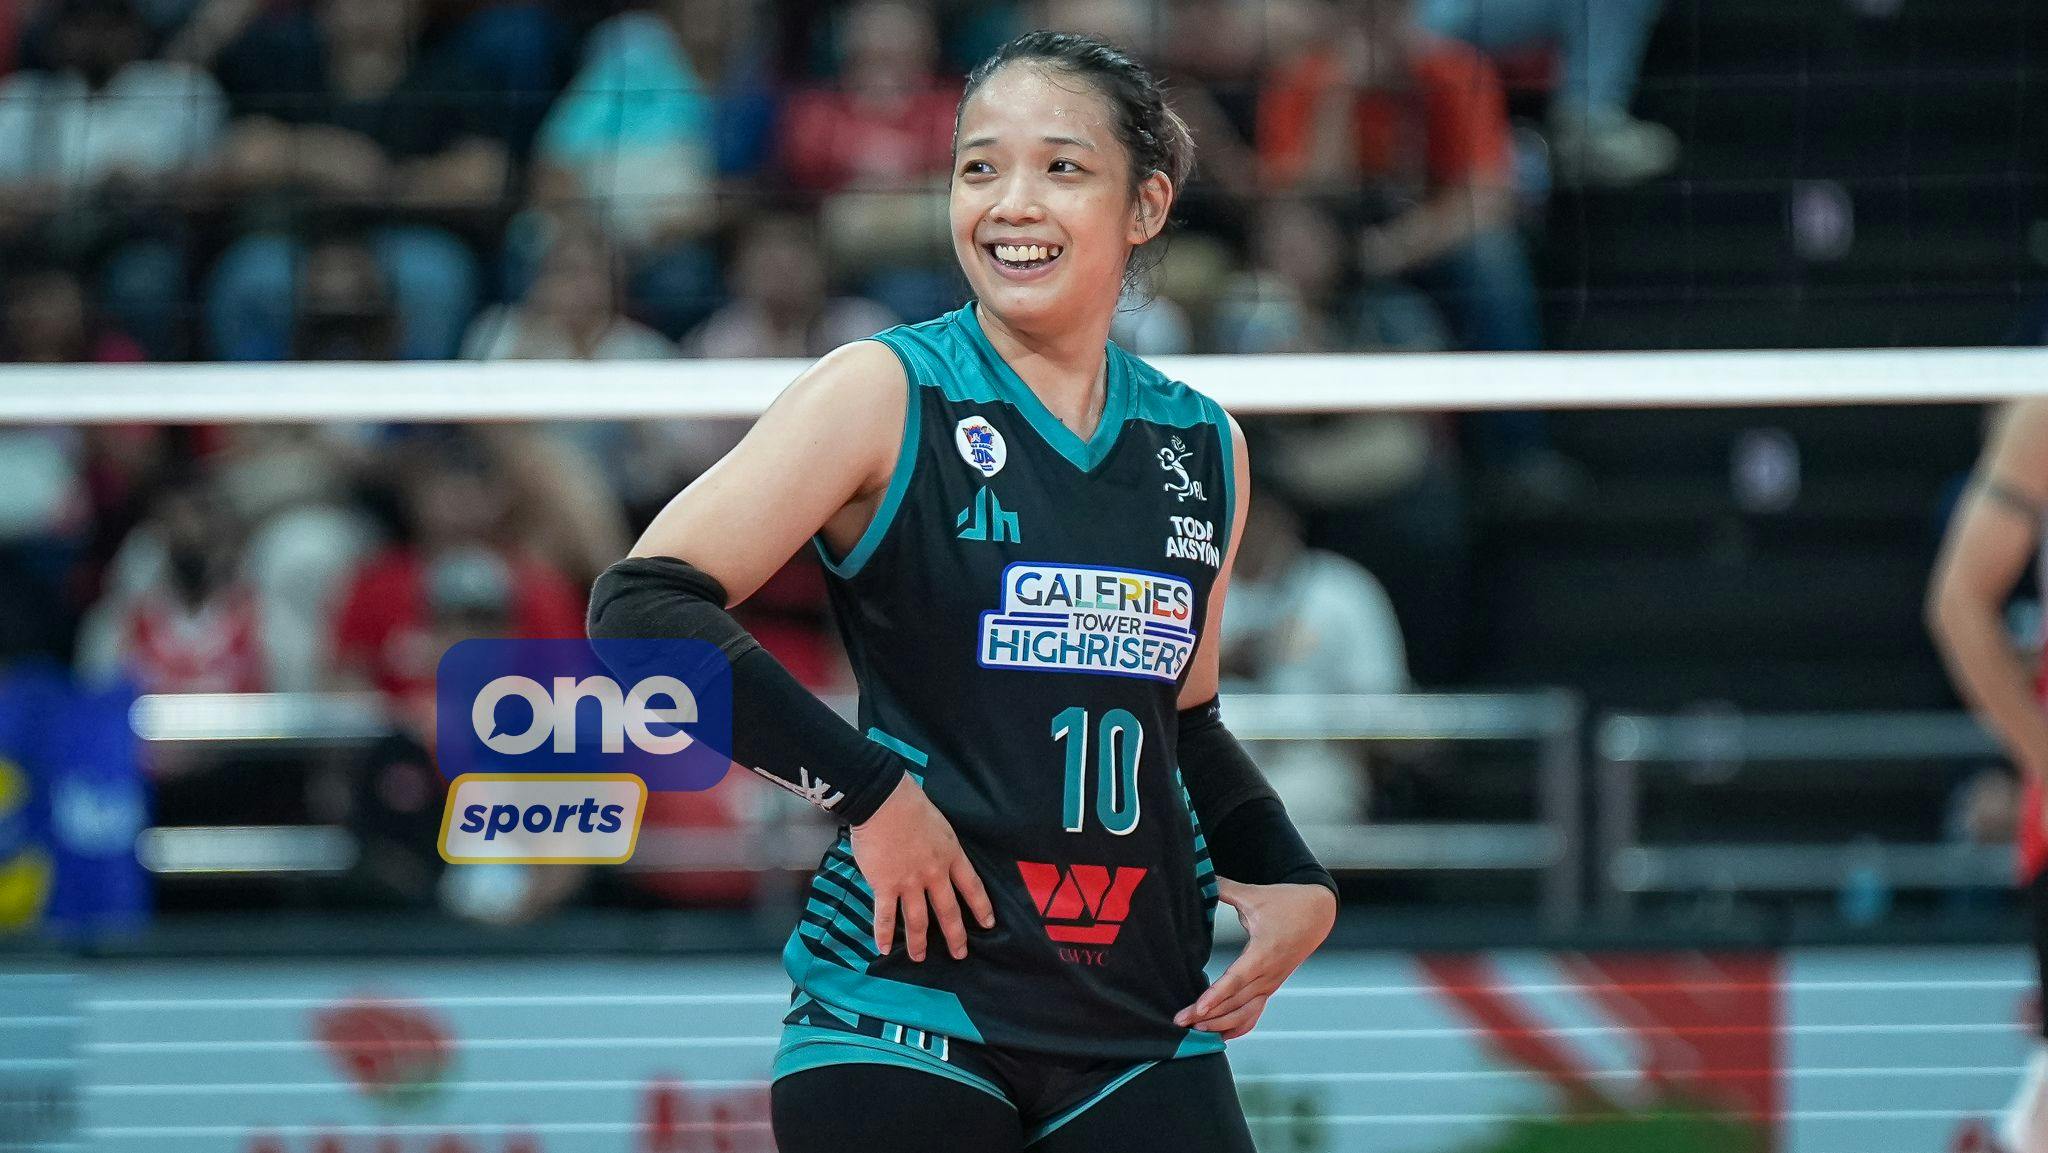 PVL: Alyssa Eroa grateful to Galeries Tower for another chance in pro volleyball scene
